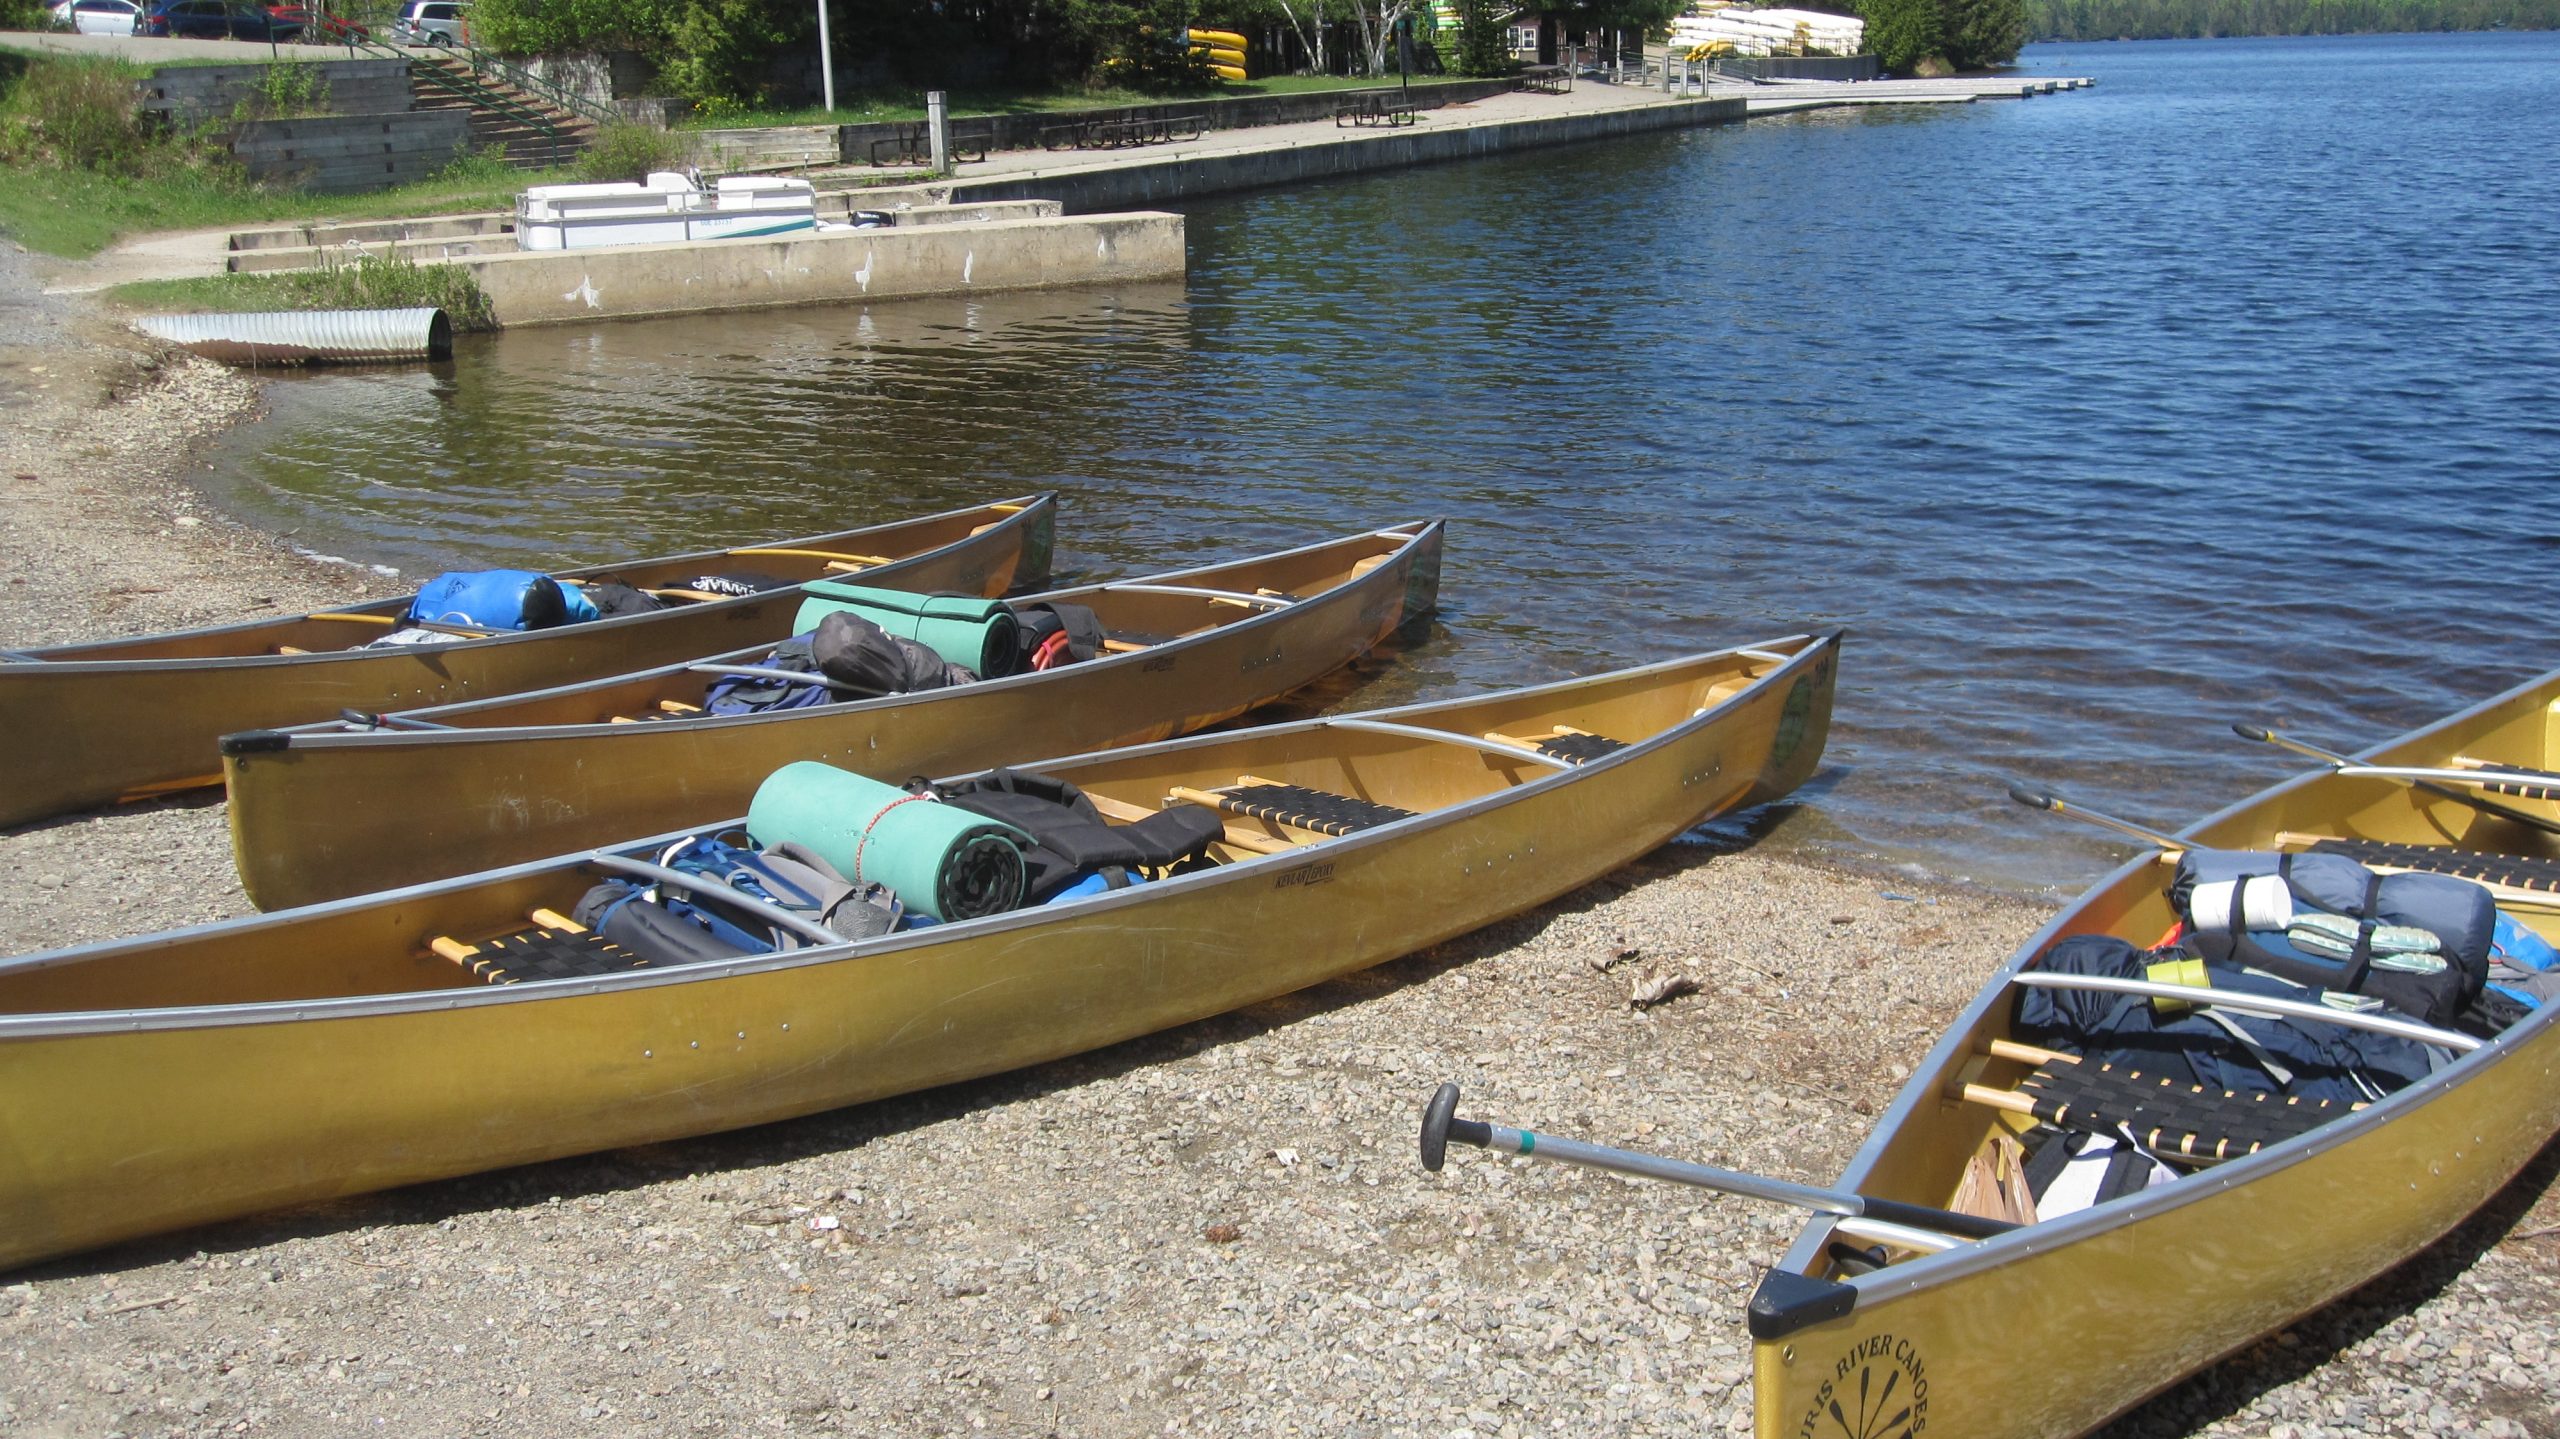 Loading the canoes at the portage store